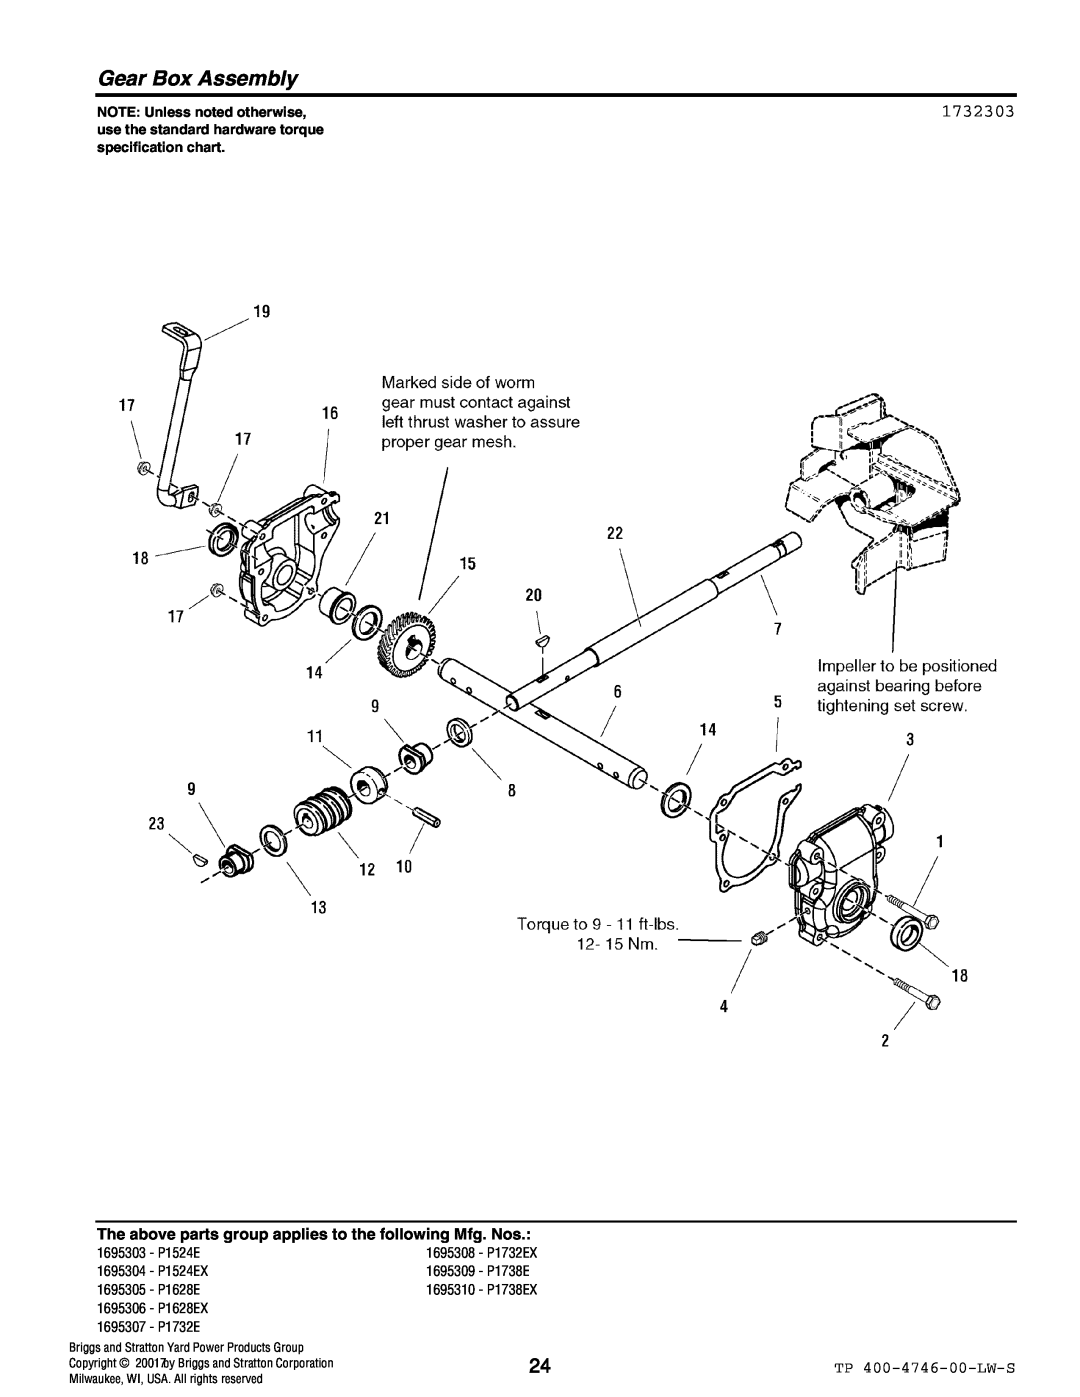 Simplicity 1695310, 1695305, 1695309, 1695307, 1695306, 1695308 manual Gear Box Assembly, 1732303, NOTE Unless noted otherwise 